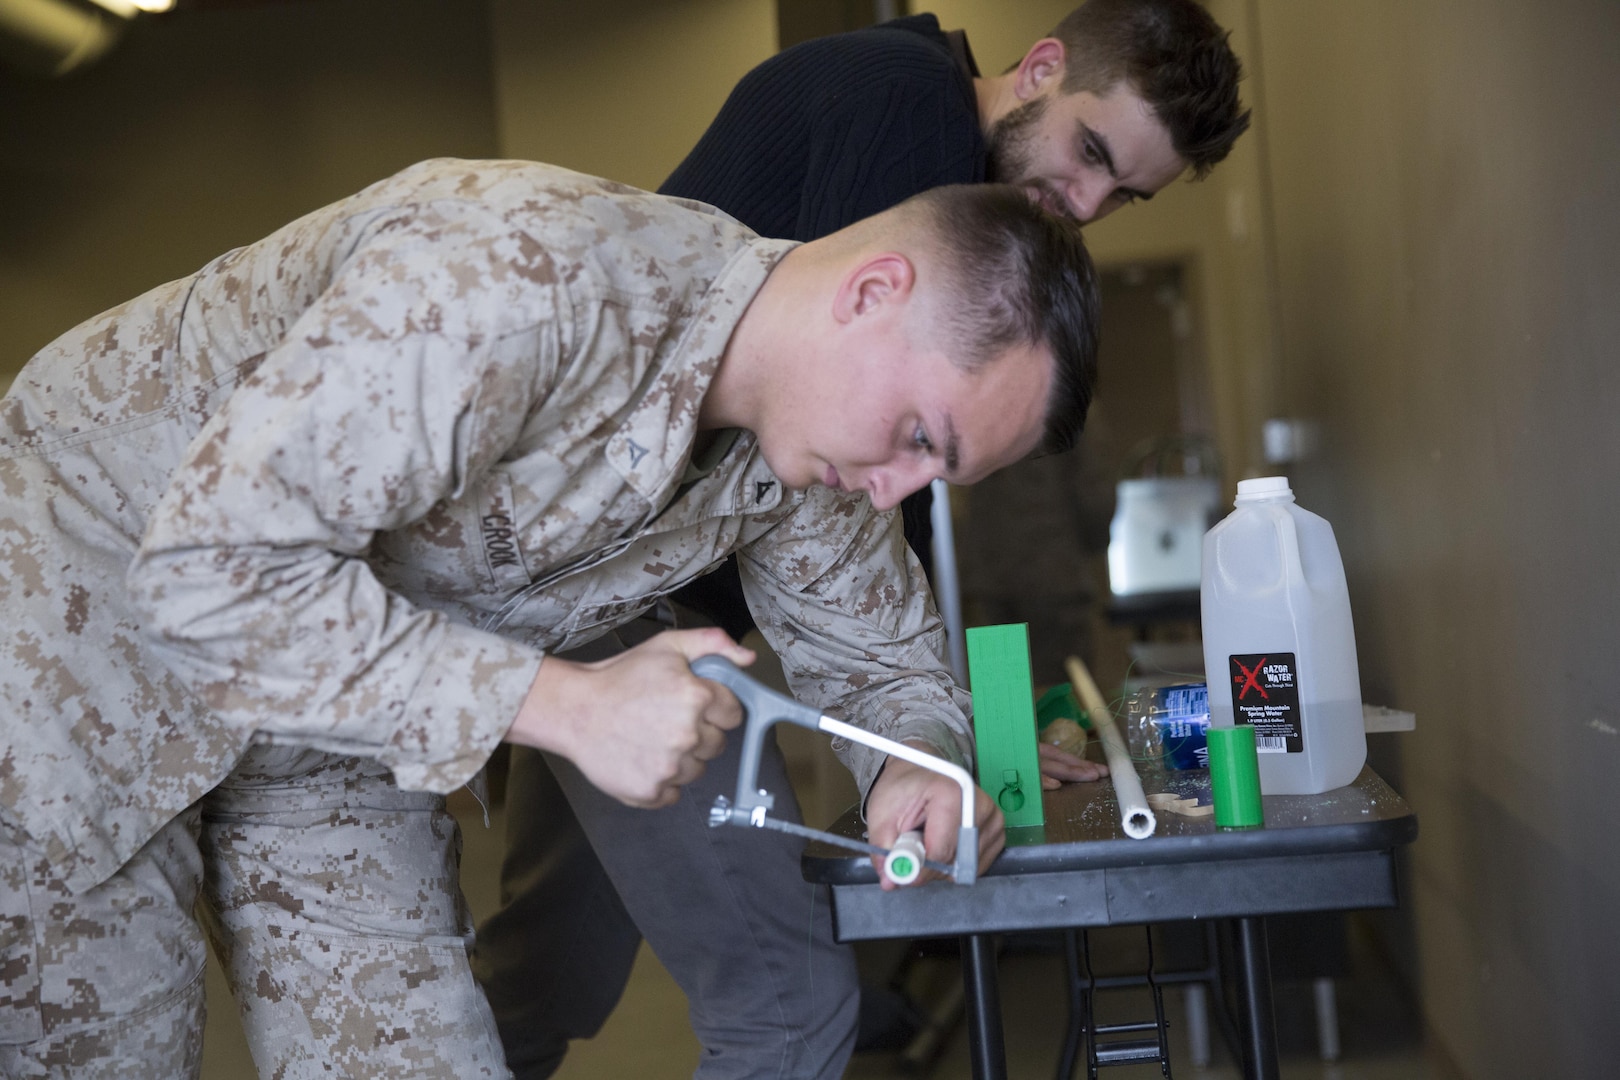 Lance Cpl. Tyler Crook, machinist, Combat Logistics Company 13, saws PVC piping during a 3D printing class aboard Marine Corps Air Ground Combat Center, Twentynine Palms, Calif., Nov. 16, 2016. Over the three-day course, Marines were challenged to manufacture innovative solutions for the problems presented to them using 3D printing innovation. (Official Marine Corps photo by Cpl. Medina Ayala-Lo/Released)